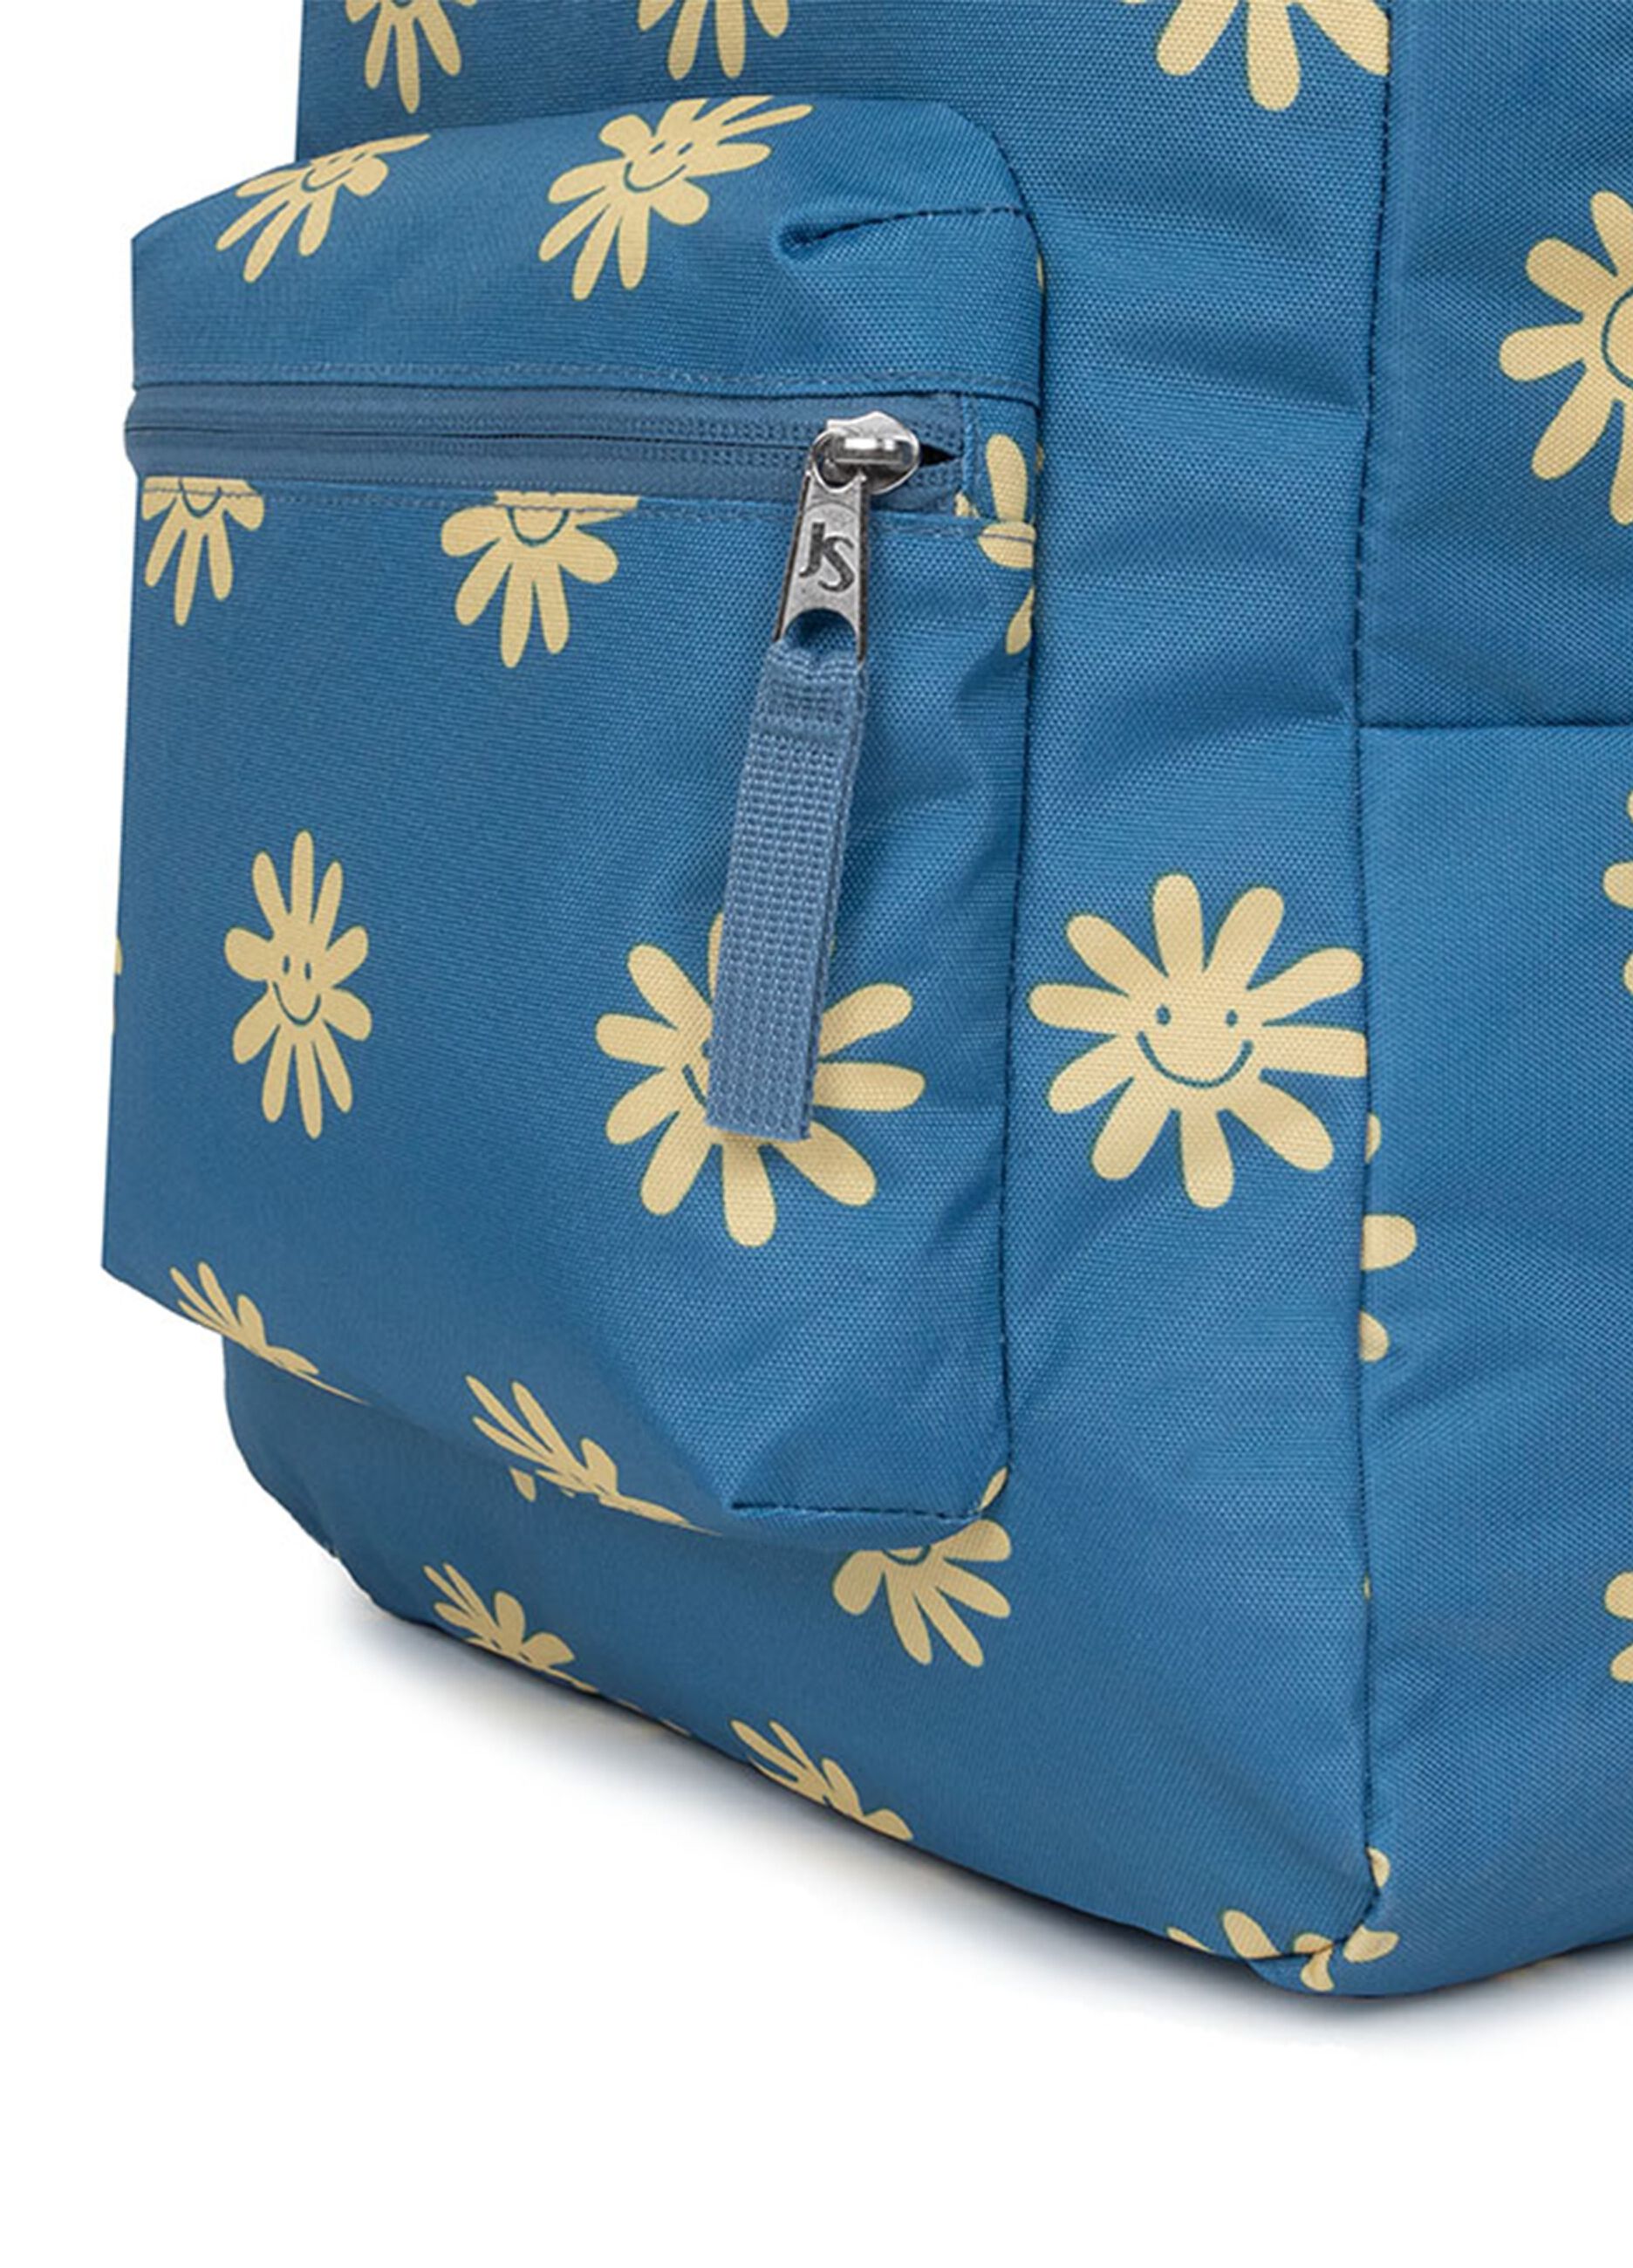 Backpack with daisies pattern